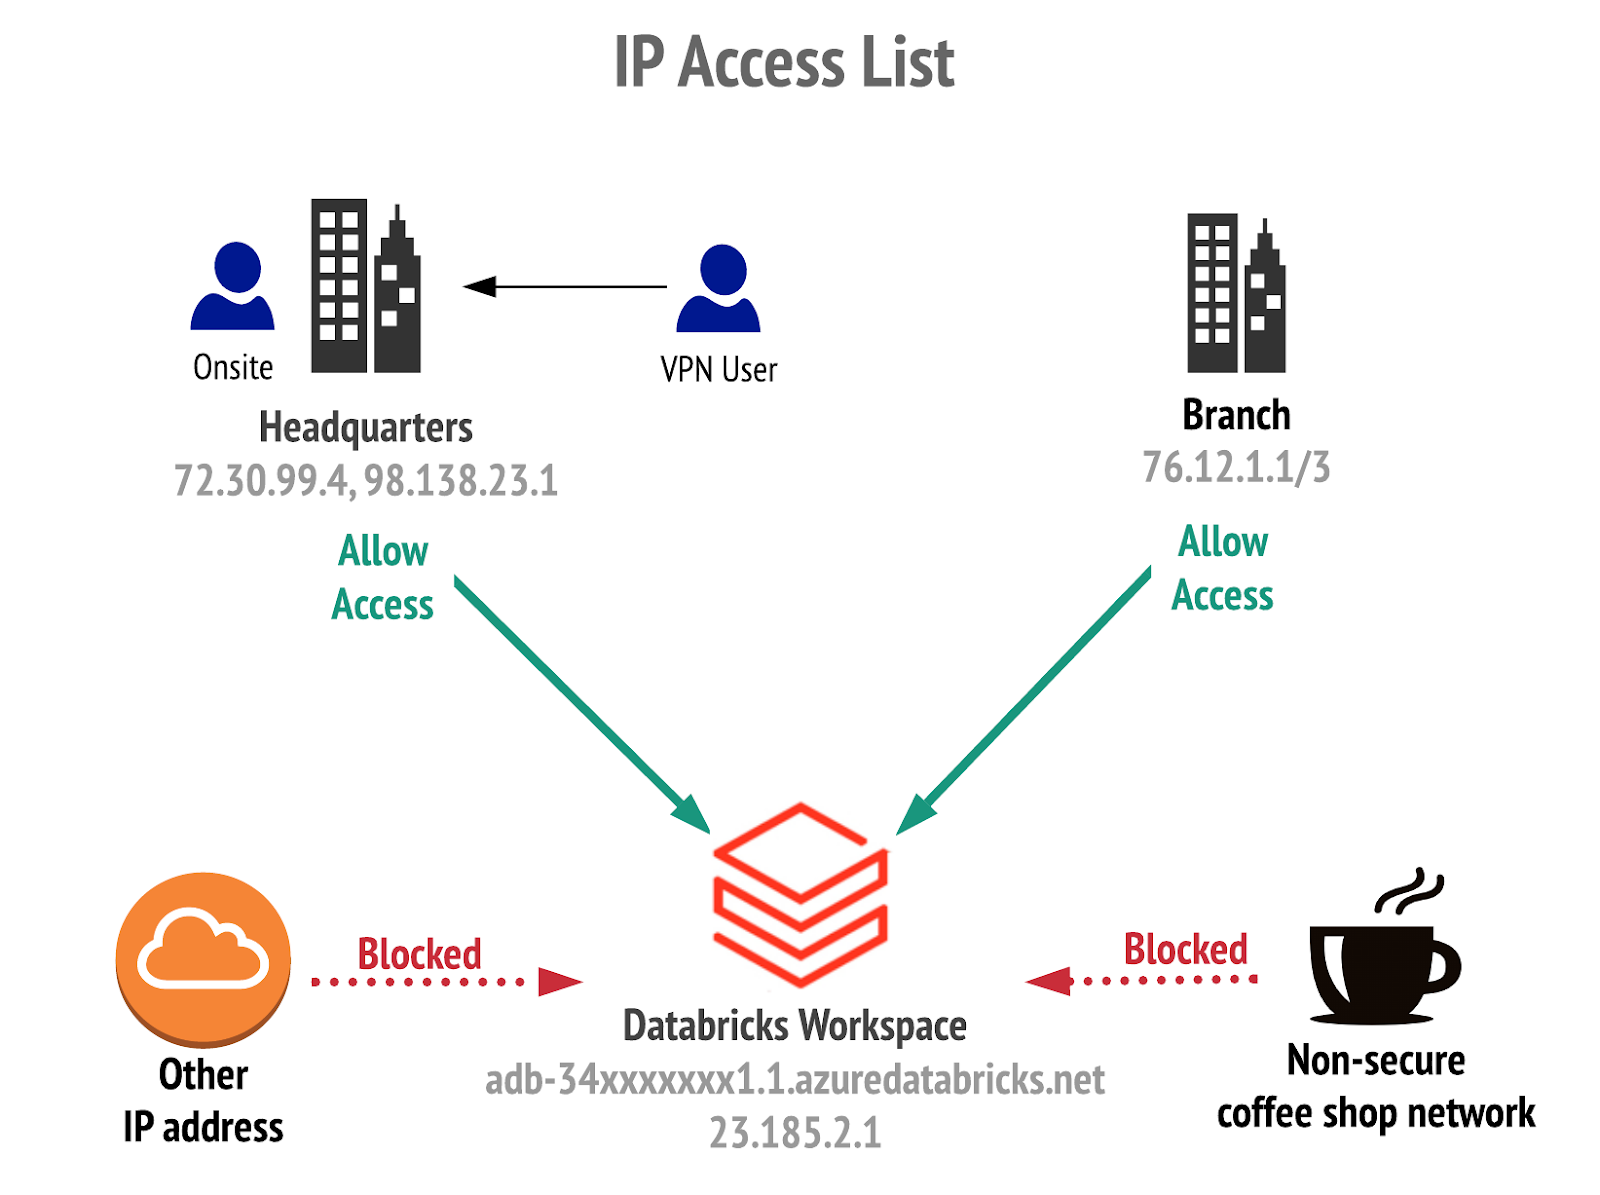 Azure Databricks allows for the configuring of IP Access Lists,  ensuring that employees have to connect via corporate VPN before accessing a workspace.